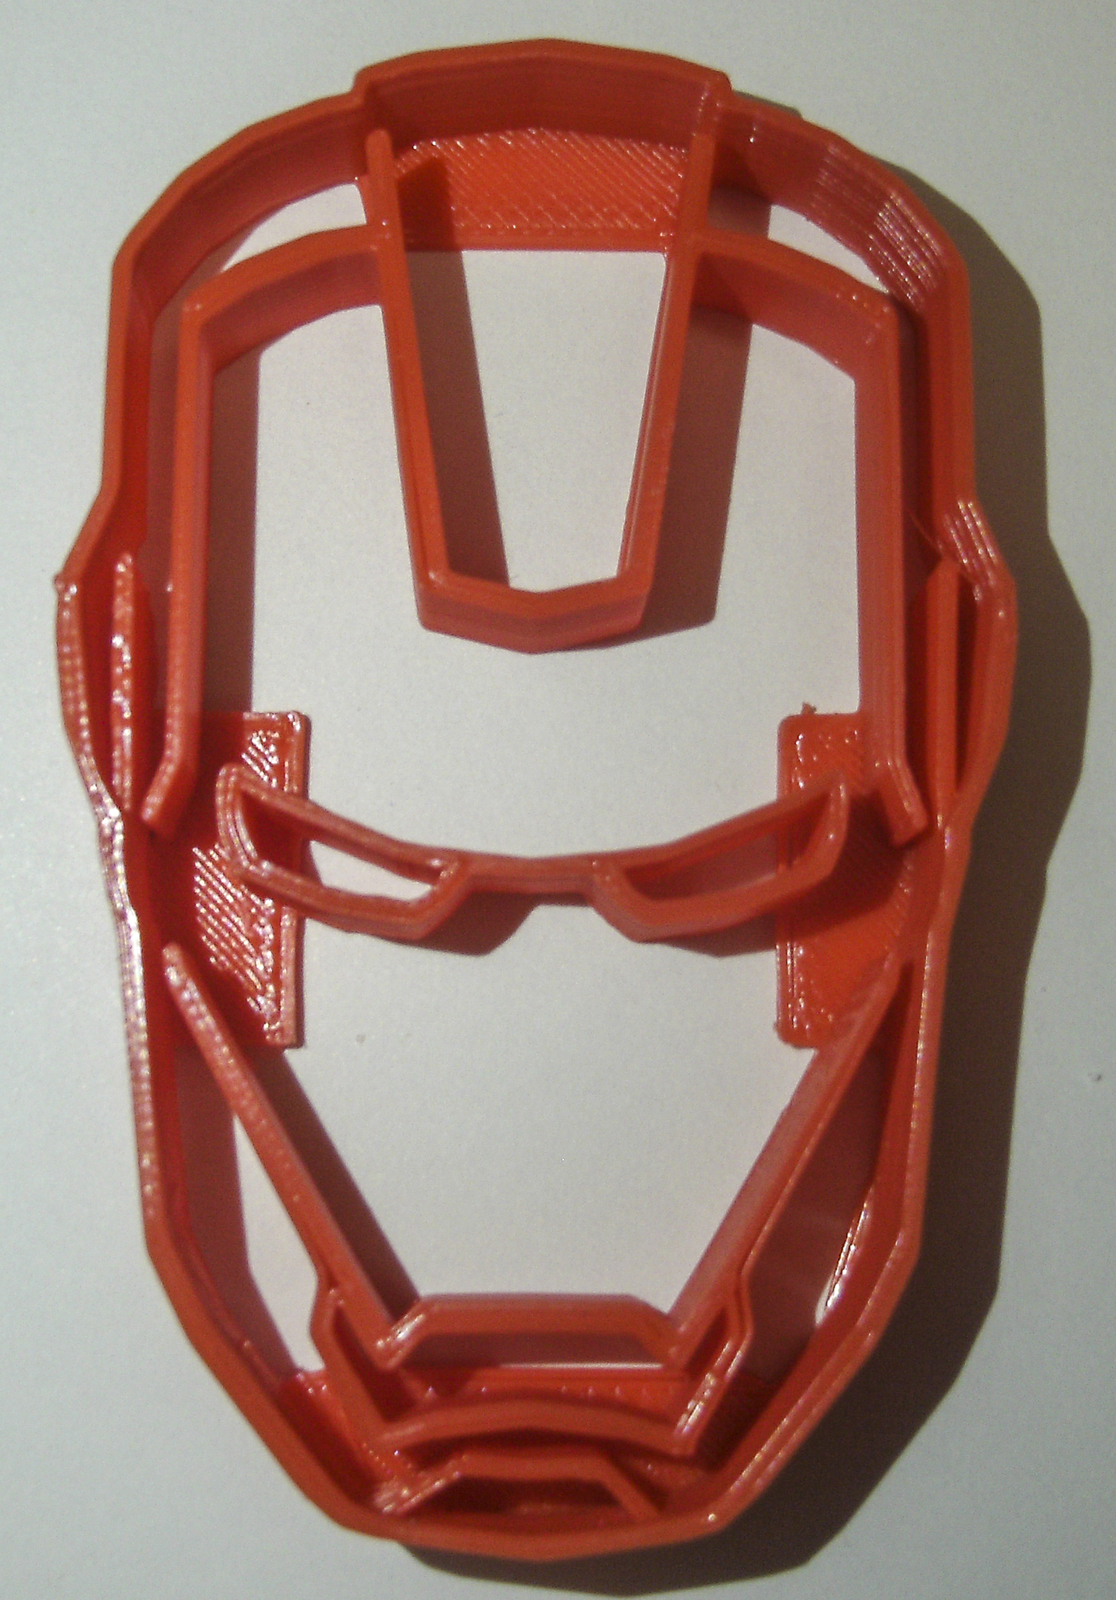 Primary image for Ironman Iron Man Superhero Marvel Character Cookie Cutter 3D Printed USA PR467